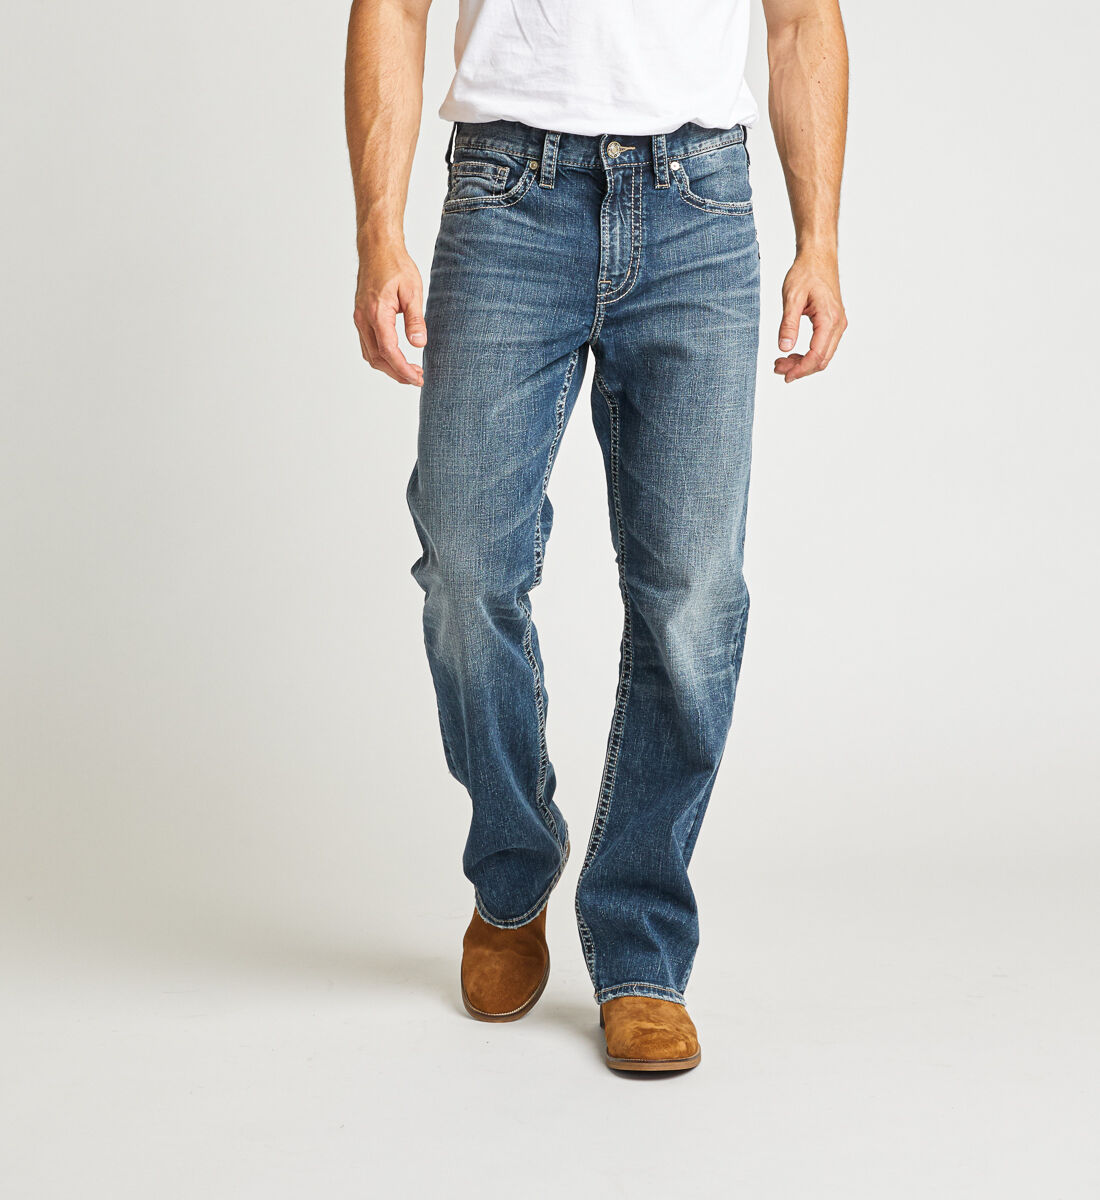 mens silver bootcut jeans